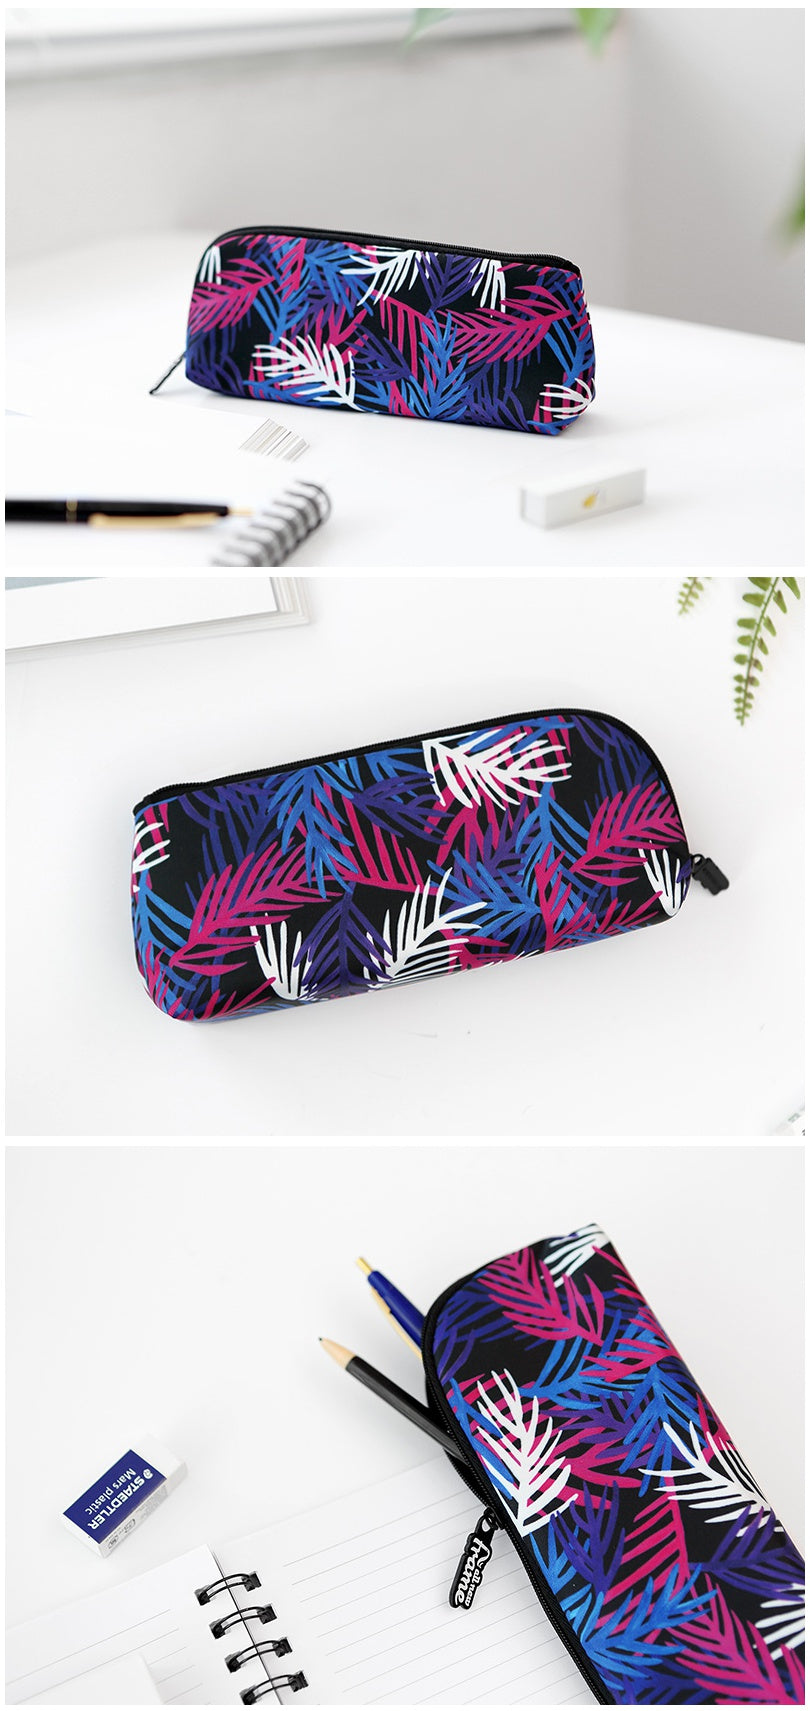 Multi-colored Black Purple Blue Tropical Floral Flower Graphic Pencil Cases Stationery Zipper School 19cm Office organizers cosmetic pouches Gifts Bags Purses